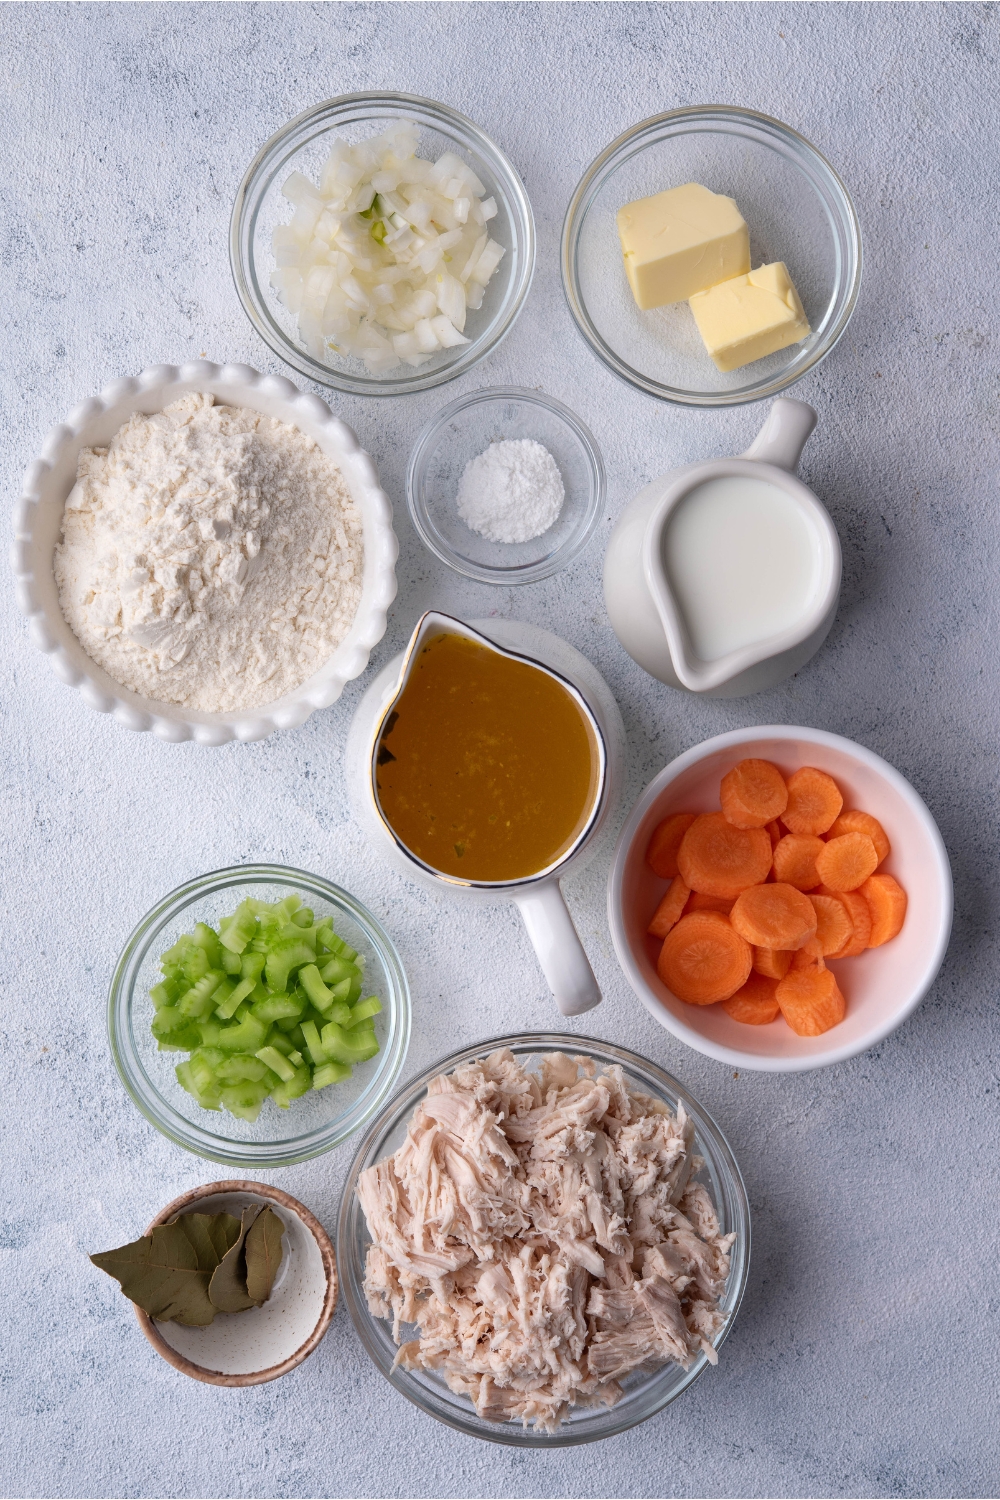 A bowl of onion, a bowl of butter, a bowl of flour, a bowl of salt, a pitcher of milk, a pitcher of broth, a bowl of celery, a bowl of carrots, a bowl of shredded chicken, and a bowl with a bay leaf in it all on a grey counter.